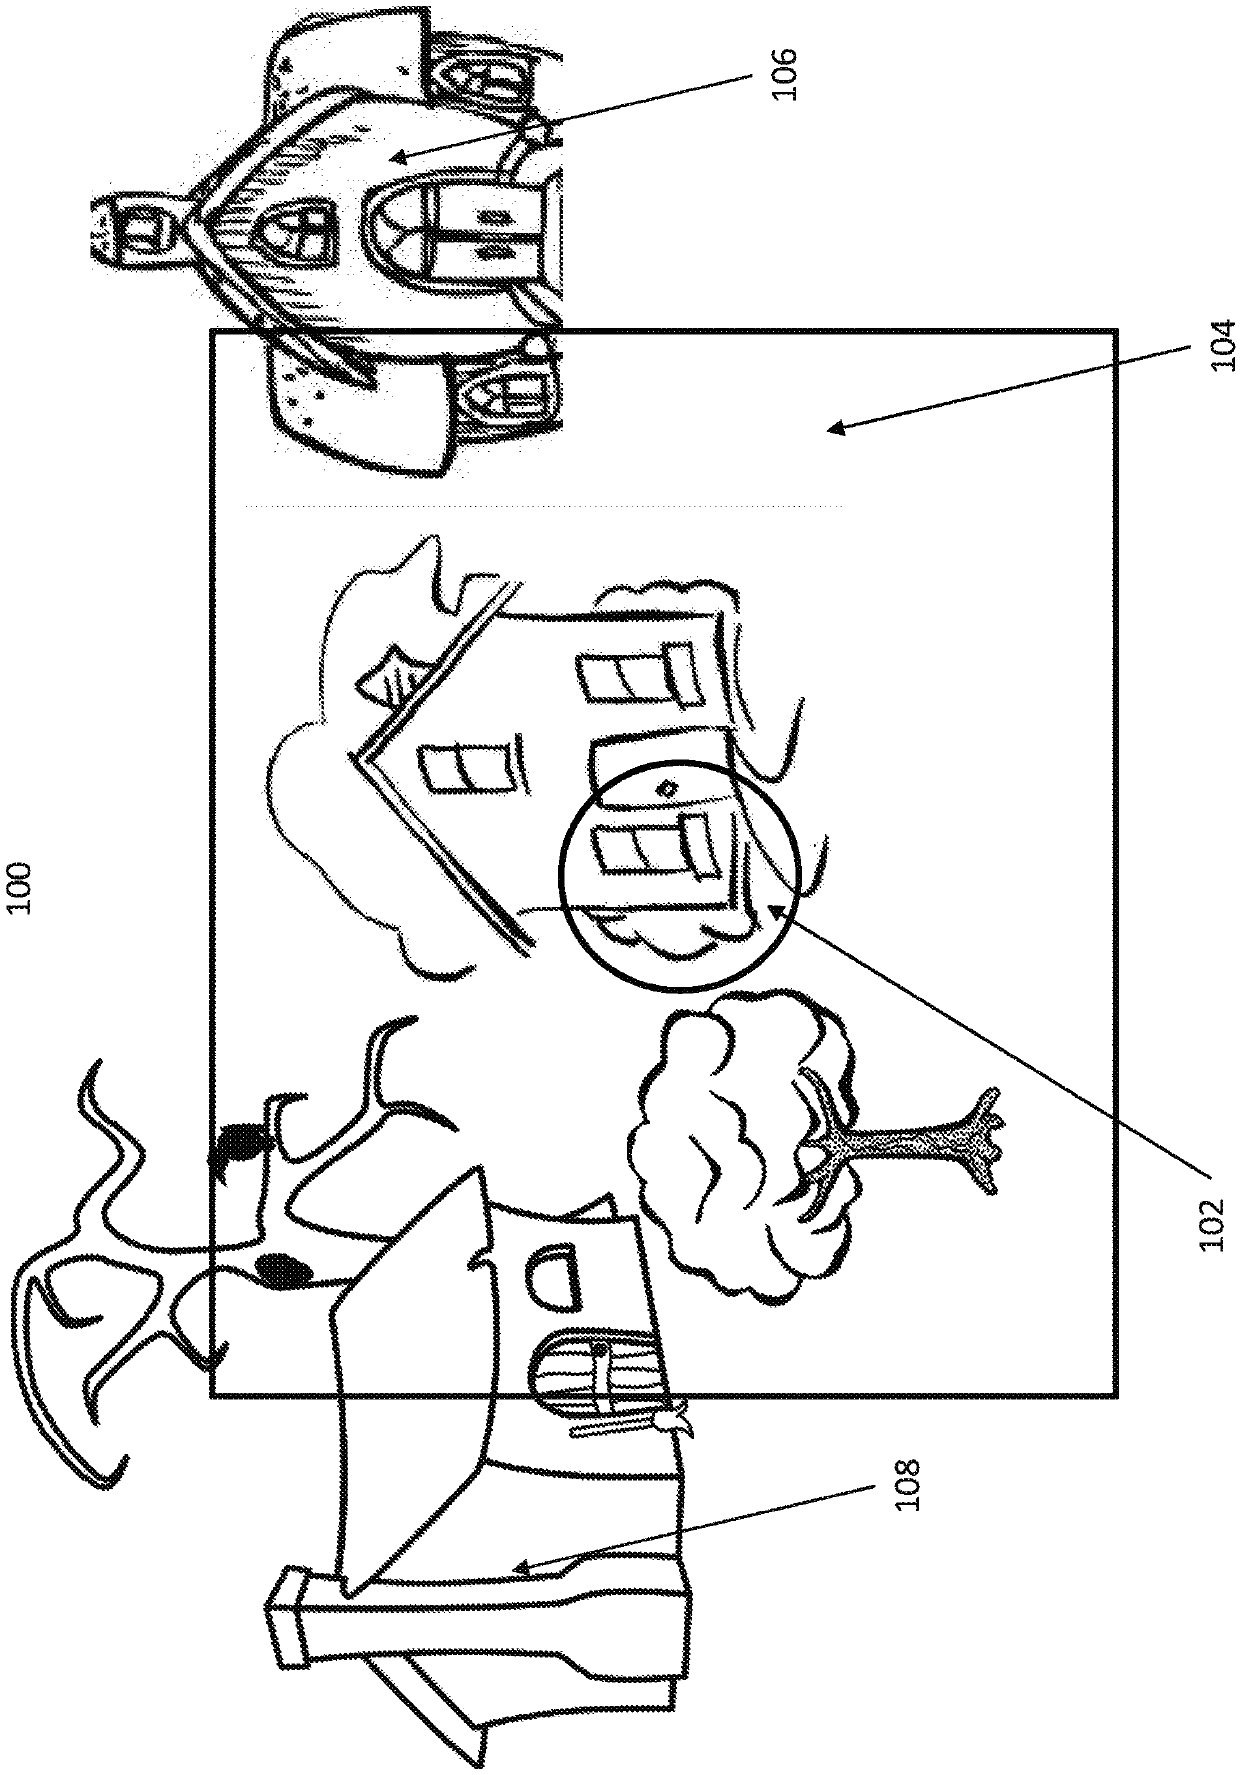 Systems and methods for head-mounted display adapted to human visual mechanism